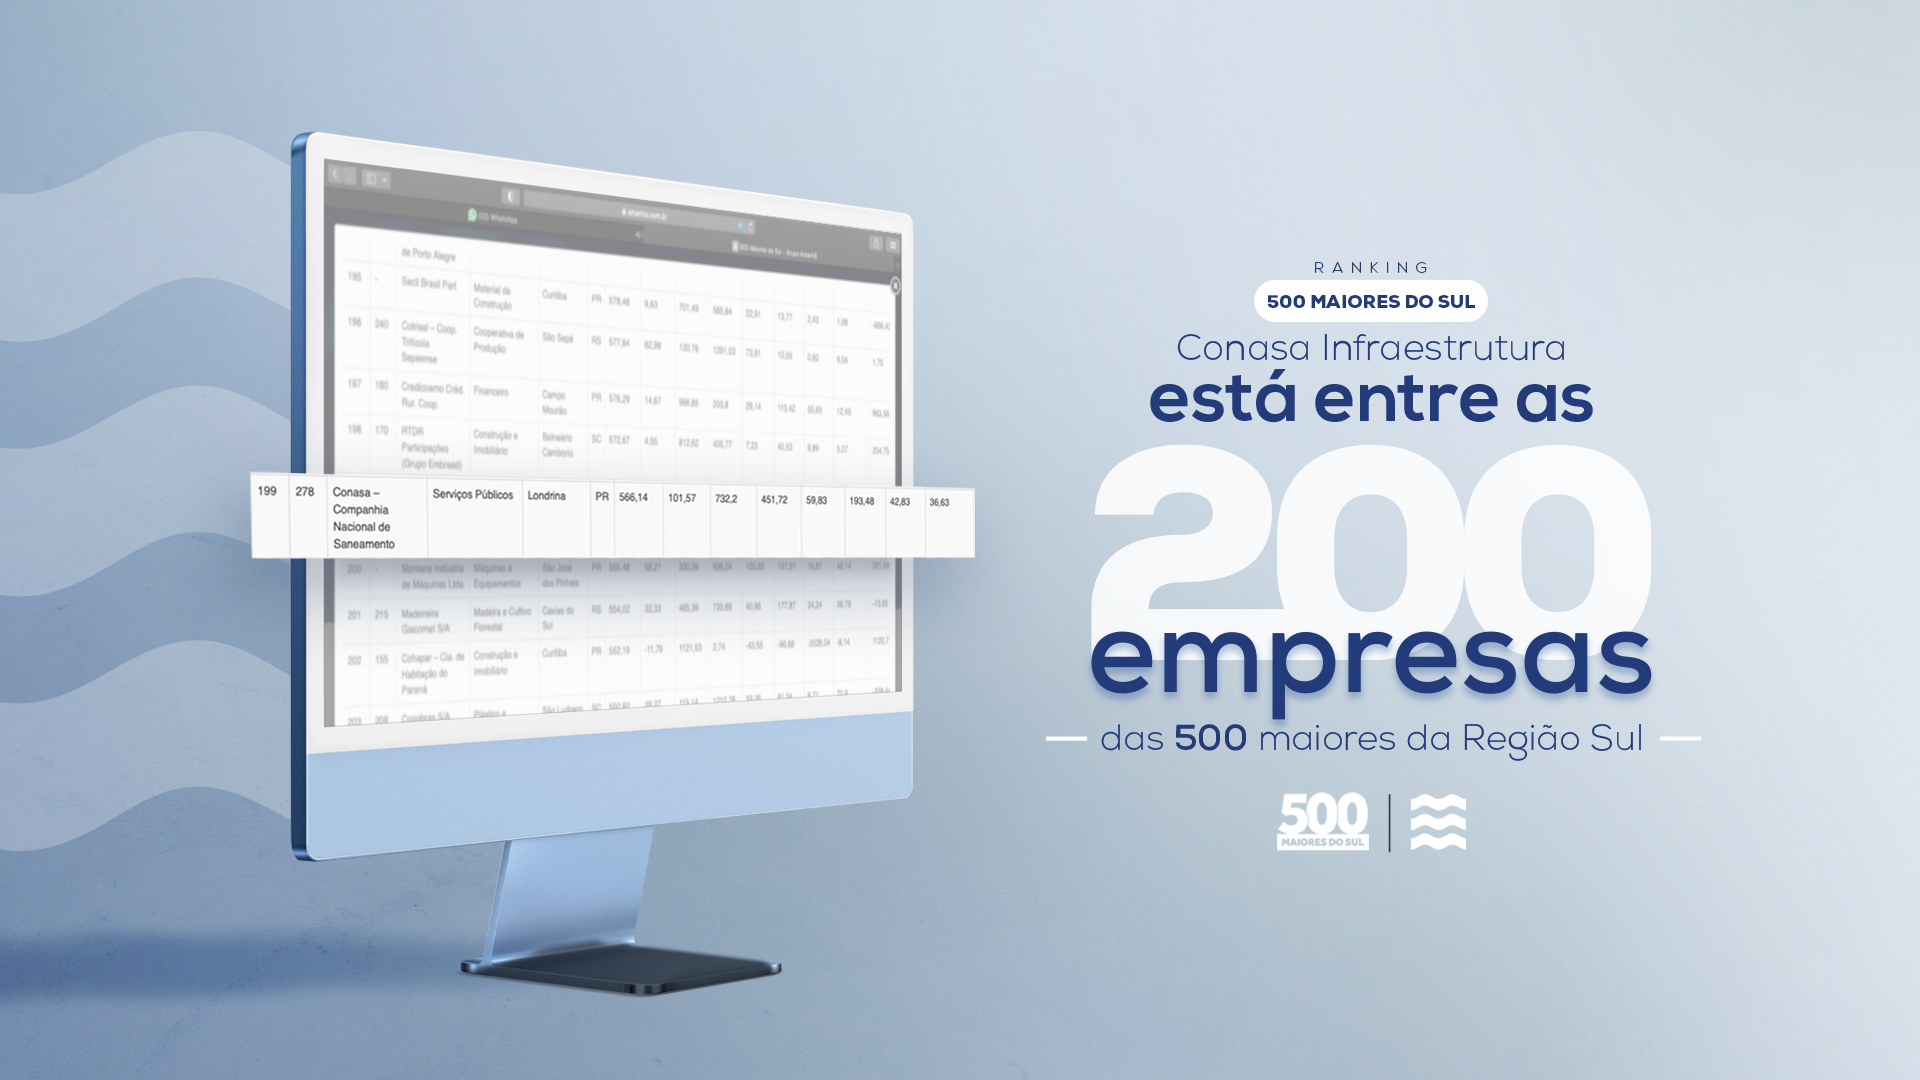 CONASA INFRAESTRUTURA RANKS 119TH AMONG THE 500 LARGEST COMPANIES IN THE SOUTH 